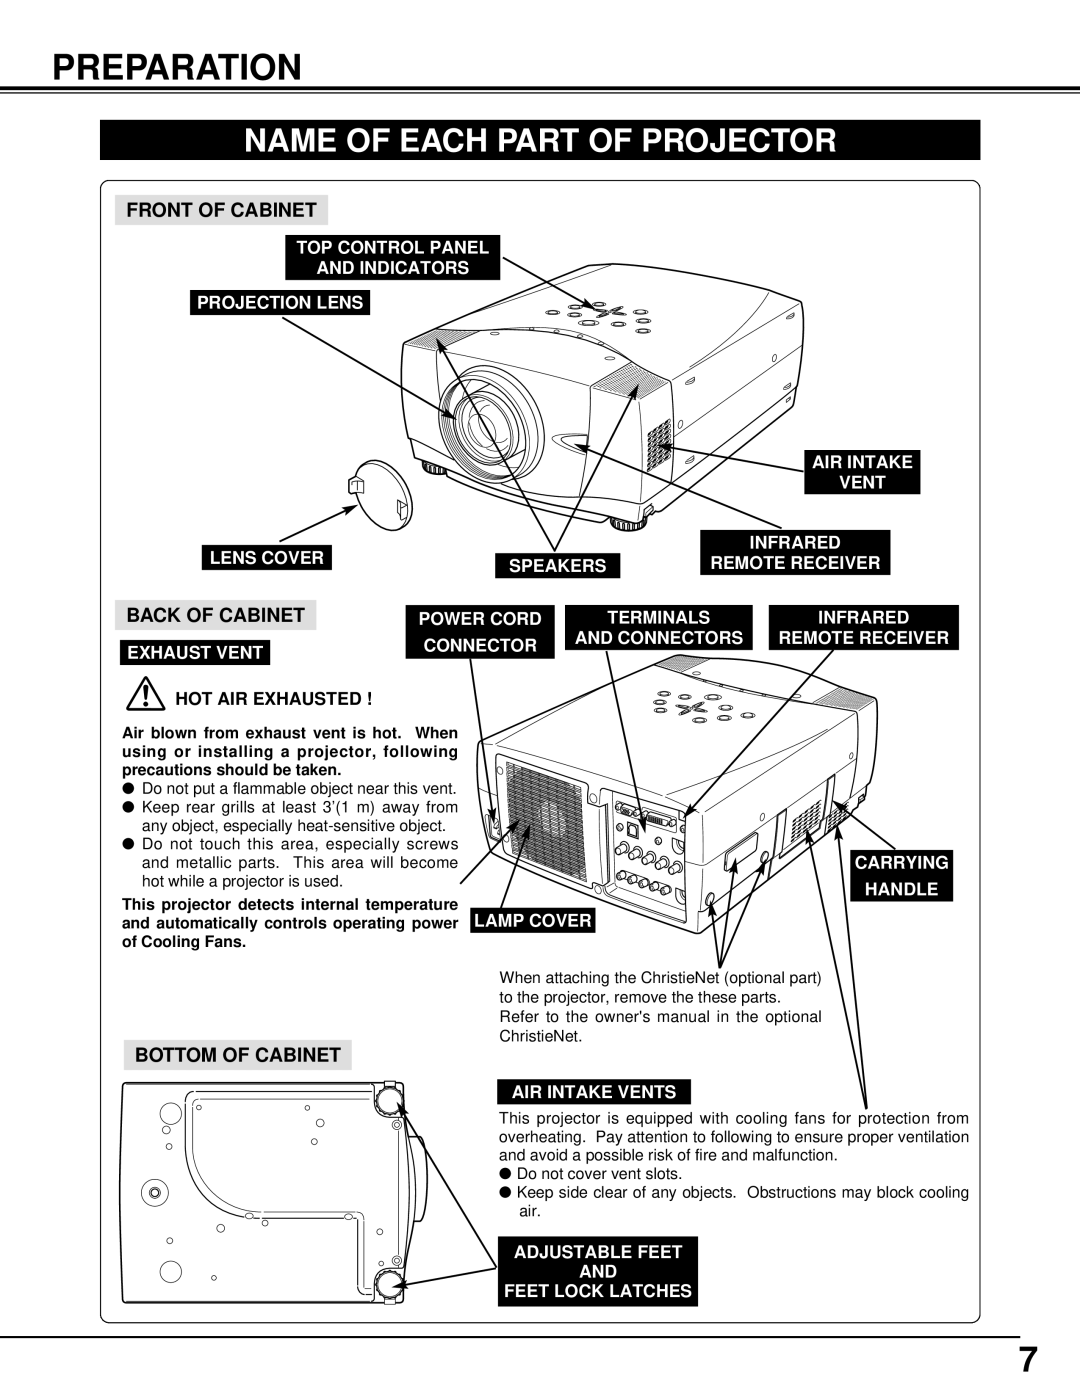 Christie Digital Systems 38-VIV205-01 Preparation, Name Of Each Part Of Projector, Front Of Cabinet, Back Of Cabinet 